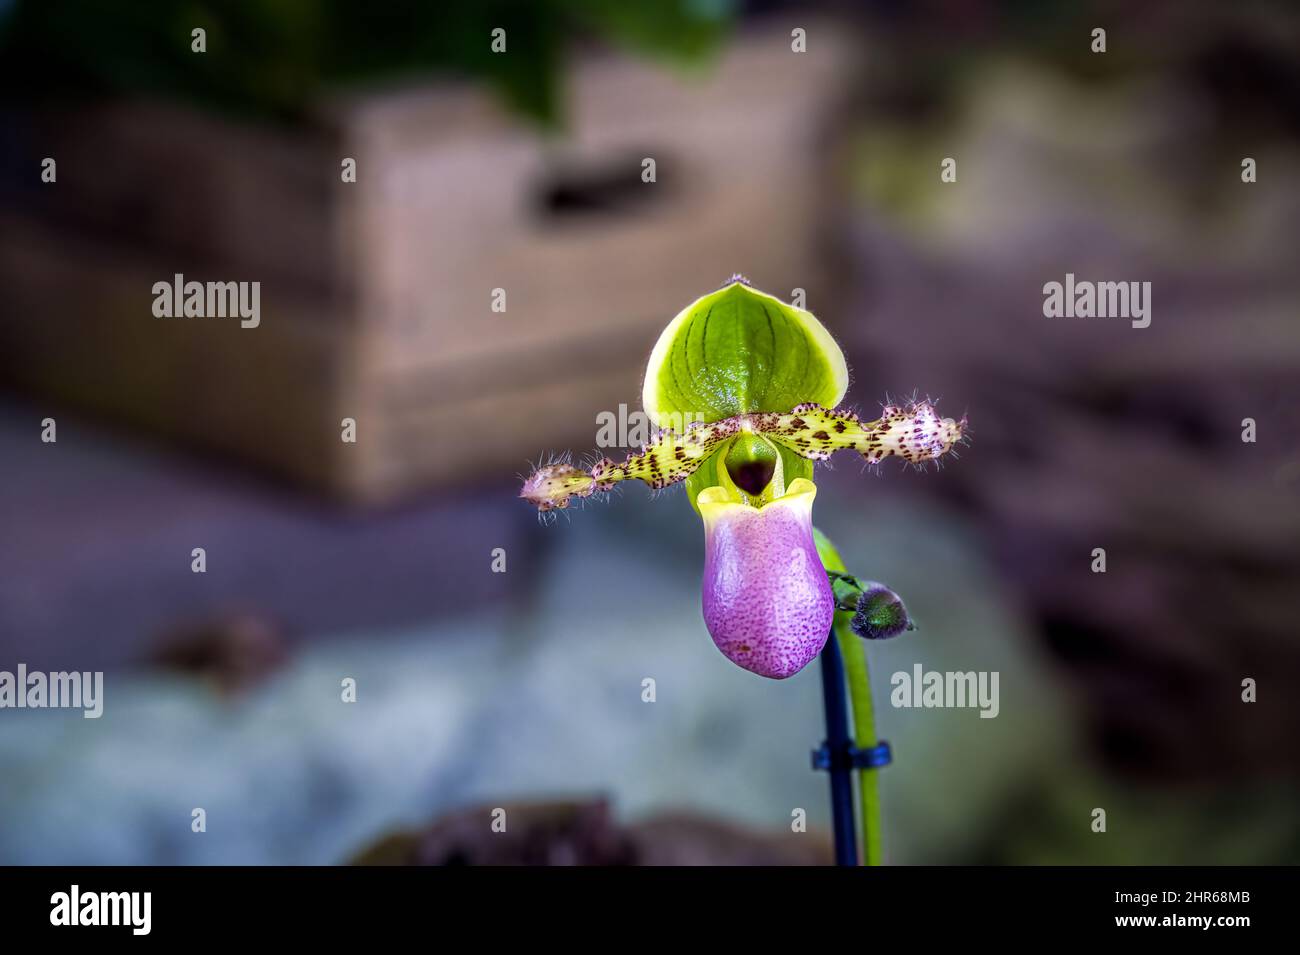 Hairy and speckled flower of the green and purple Paphiopedilum Pinochio orchid Stock Photo